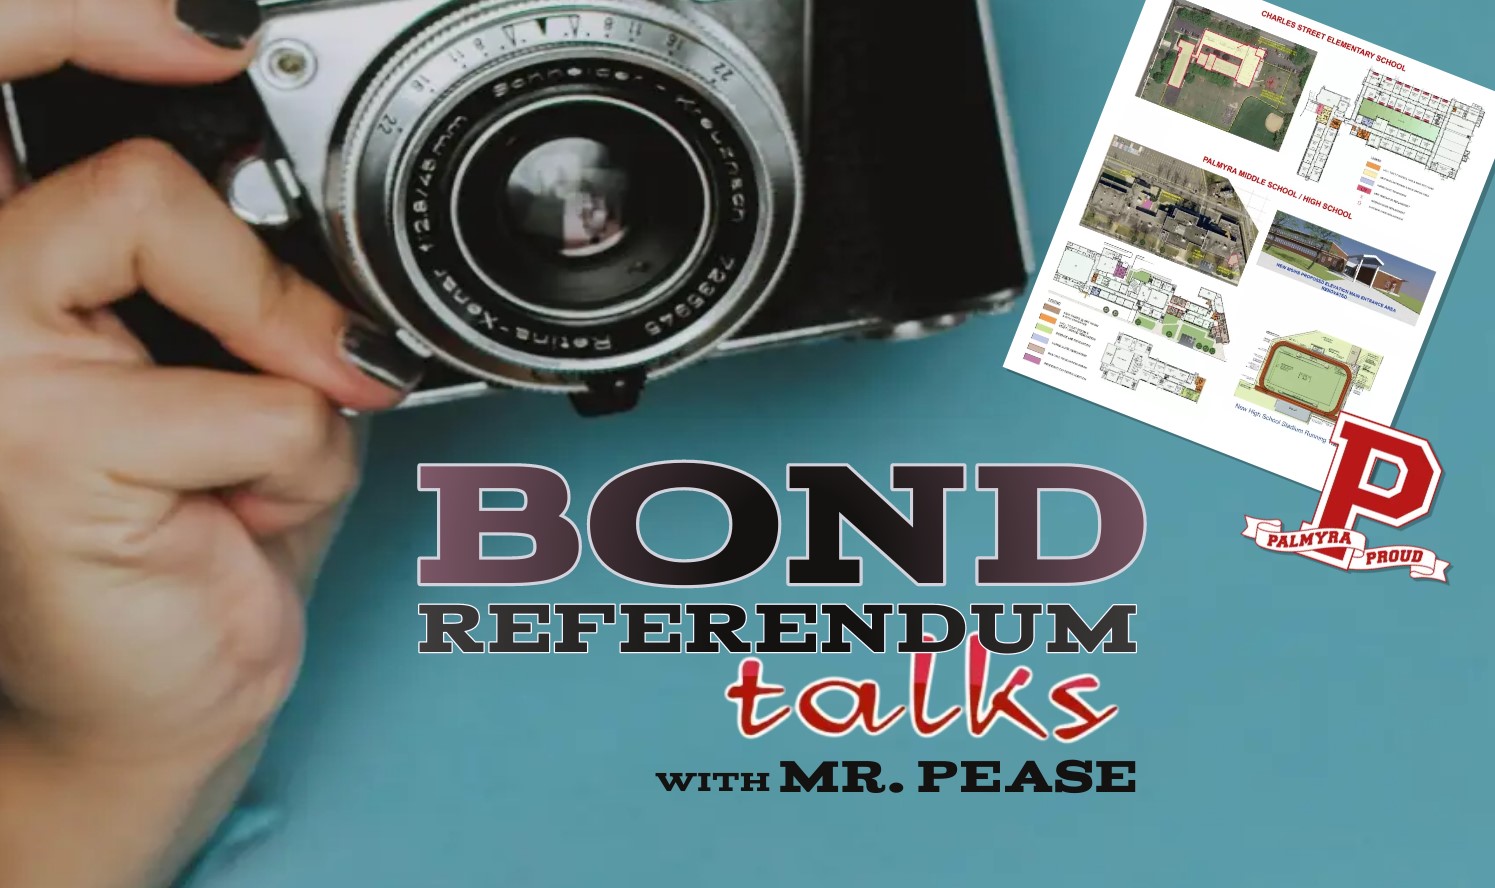 old fashioned camera with graphics for bond referendum talks